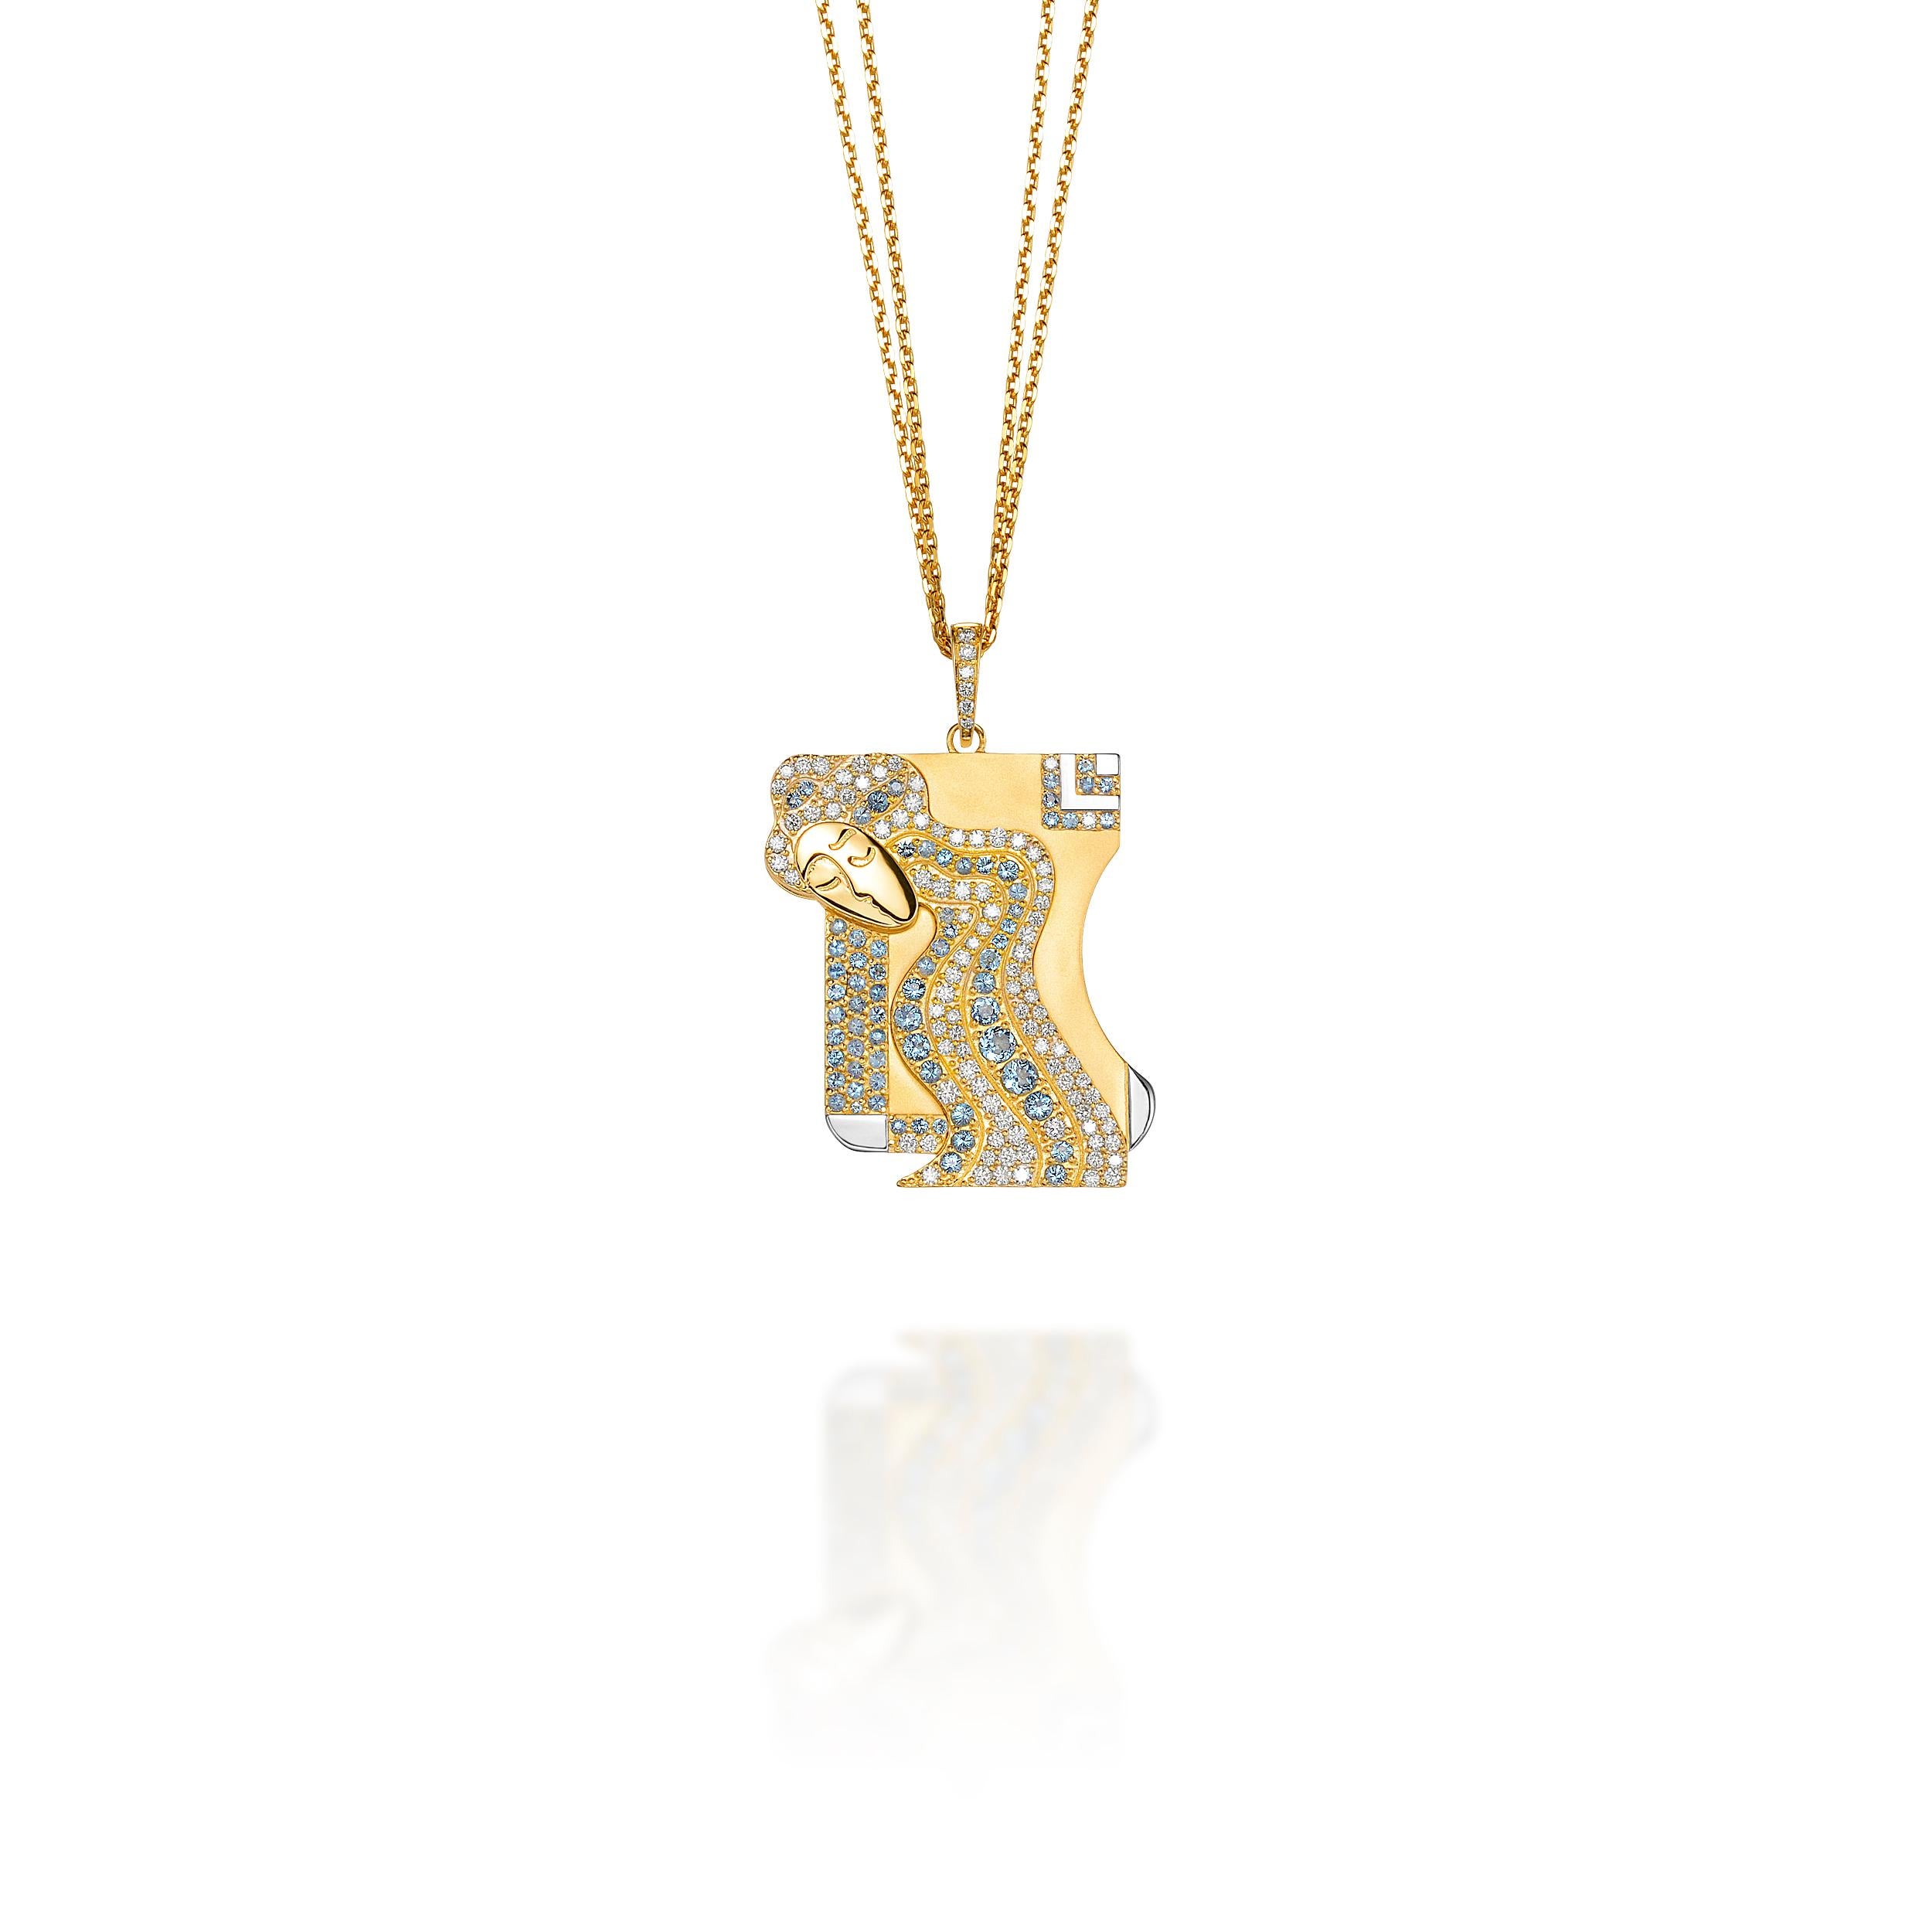 Virgo Pendant - methodically self controlled on the surface, wise and witty. Thoughtfull in revealing all that passion and delicate emotion from within. Diamonds aid you in attaining spiritual balance.

Jazychic Zodiac Pendant 18k Gold with 0.82 ct